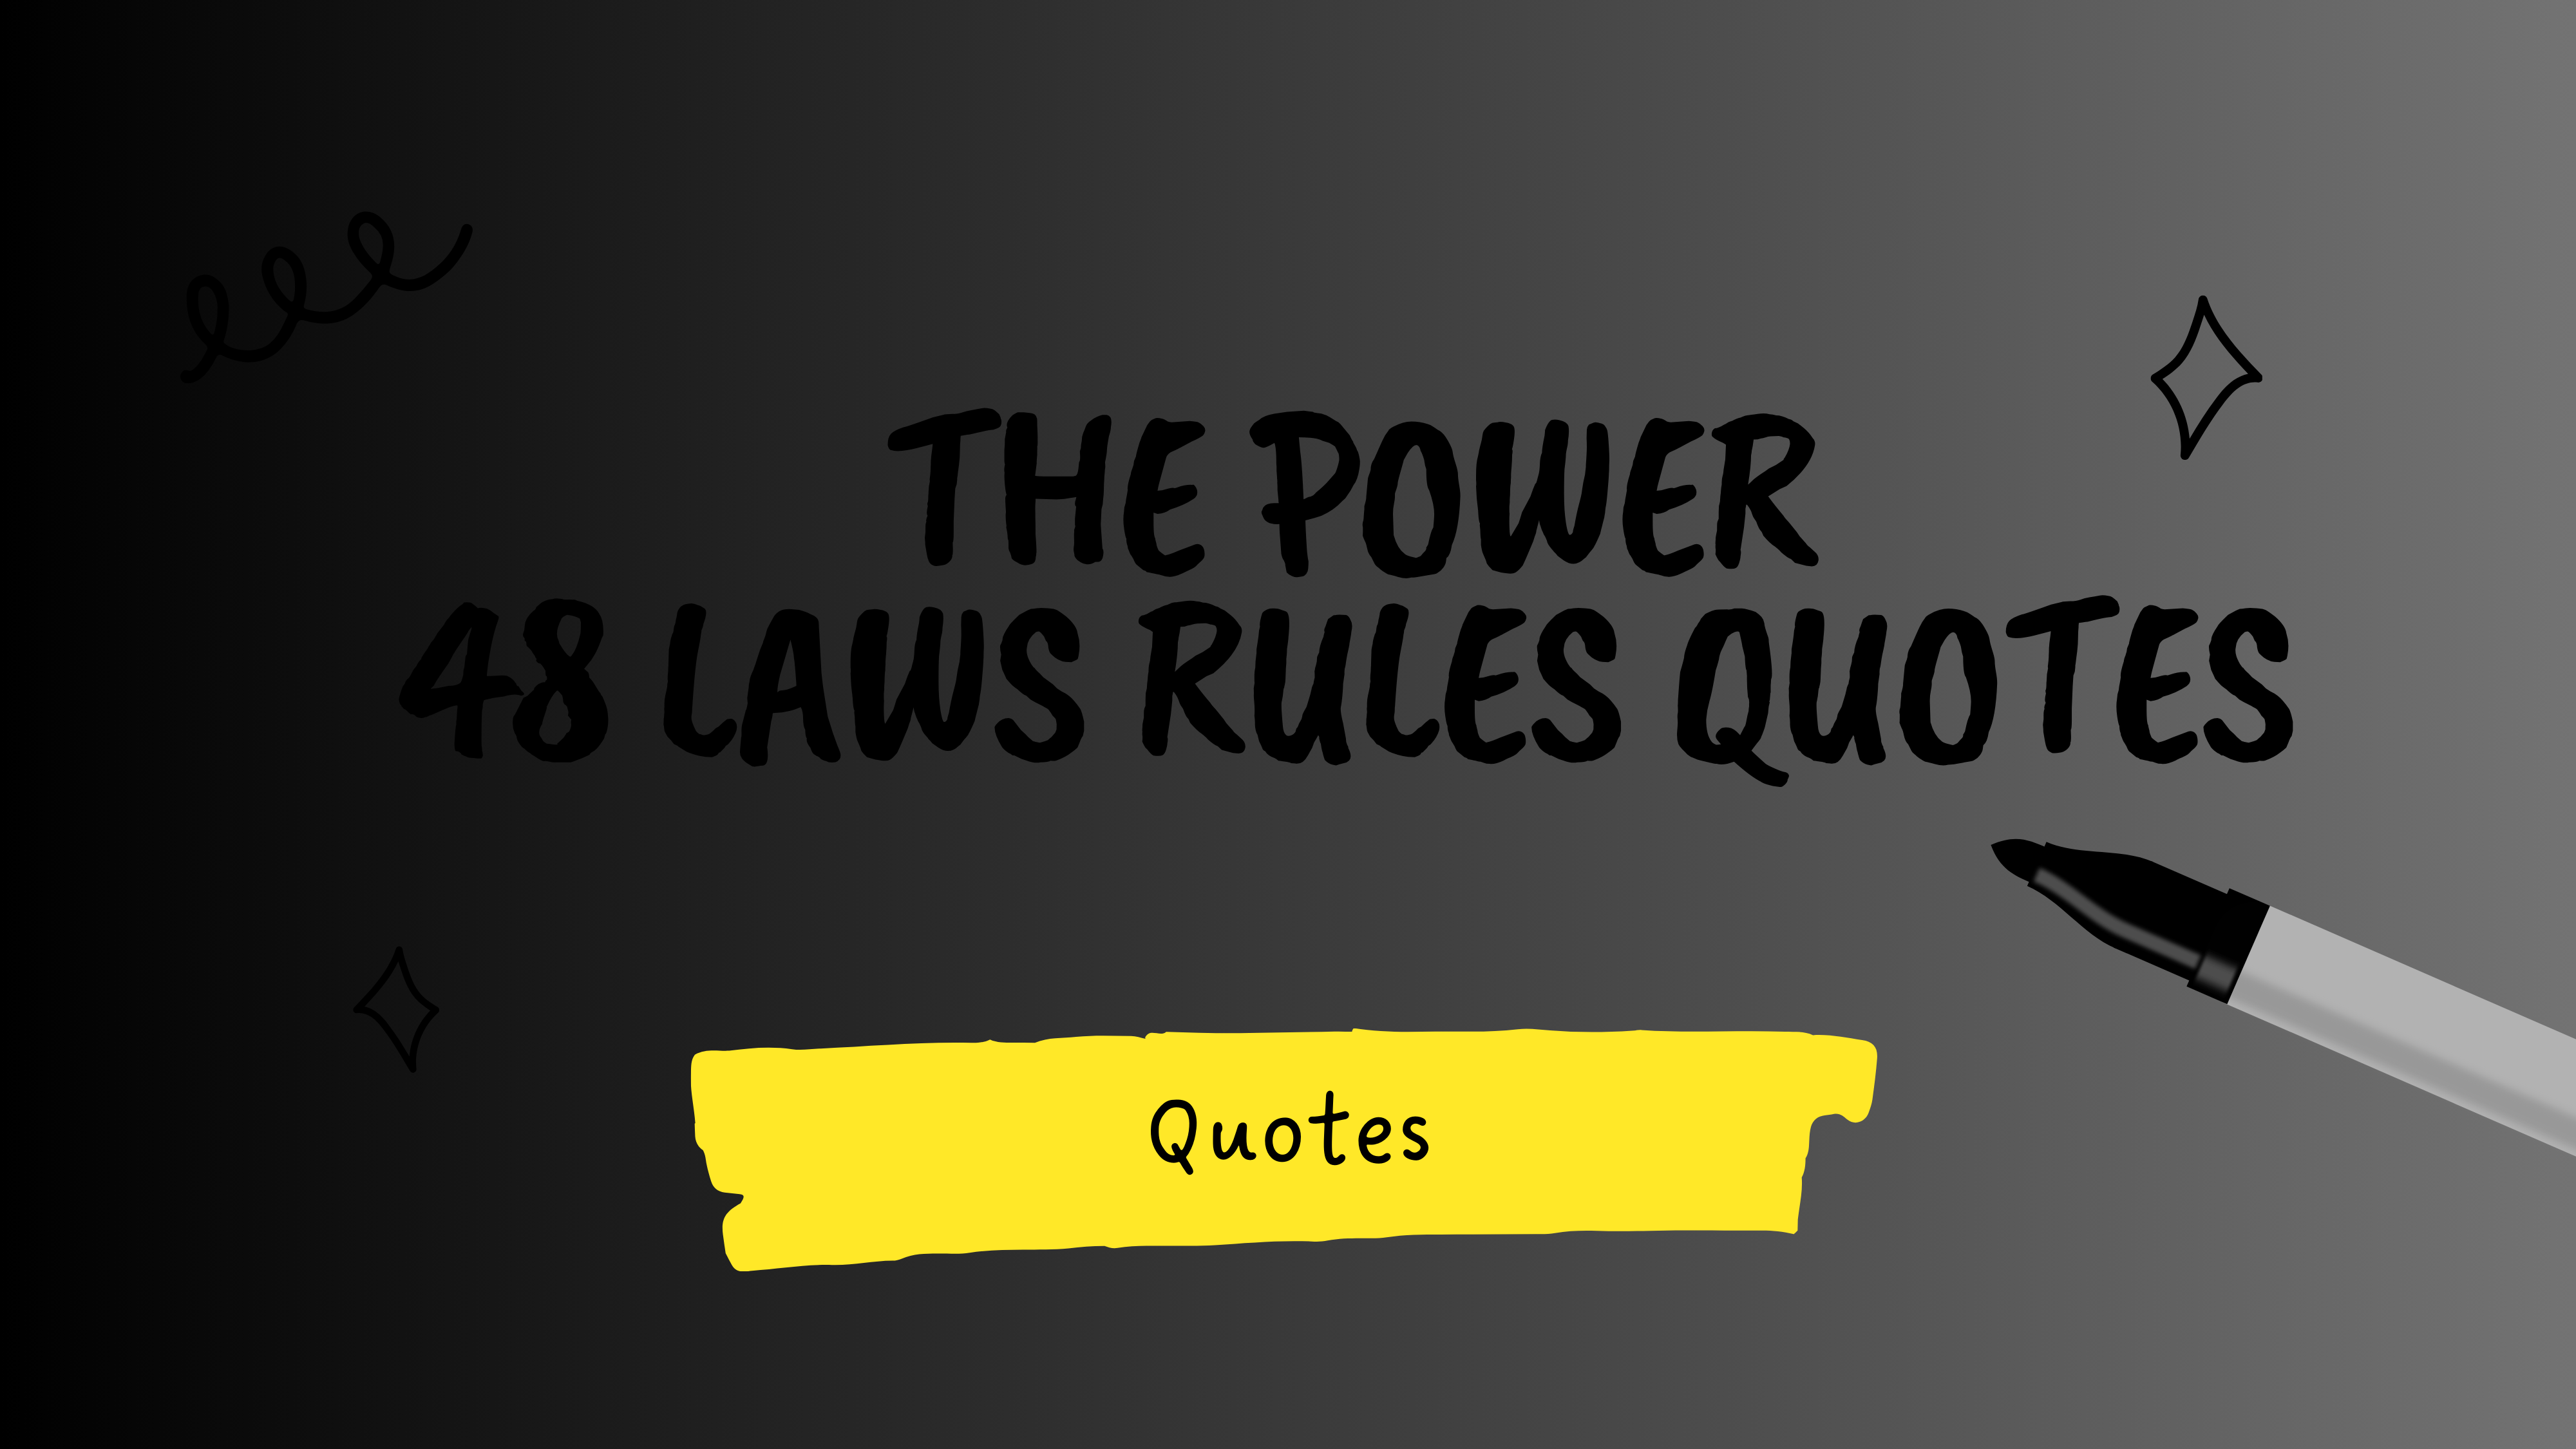 48 laws of power quotes images